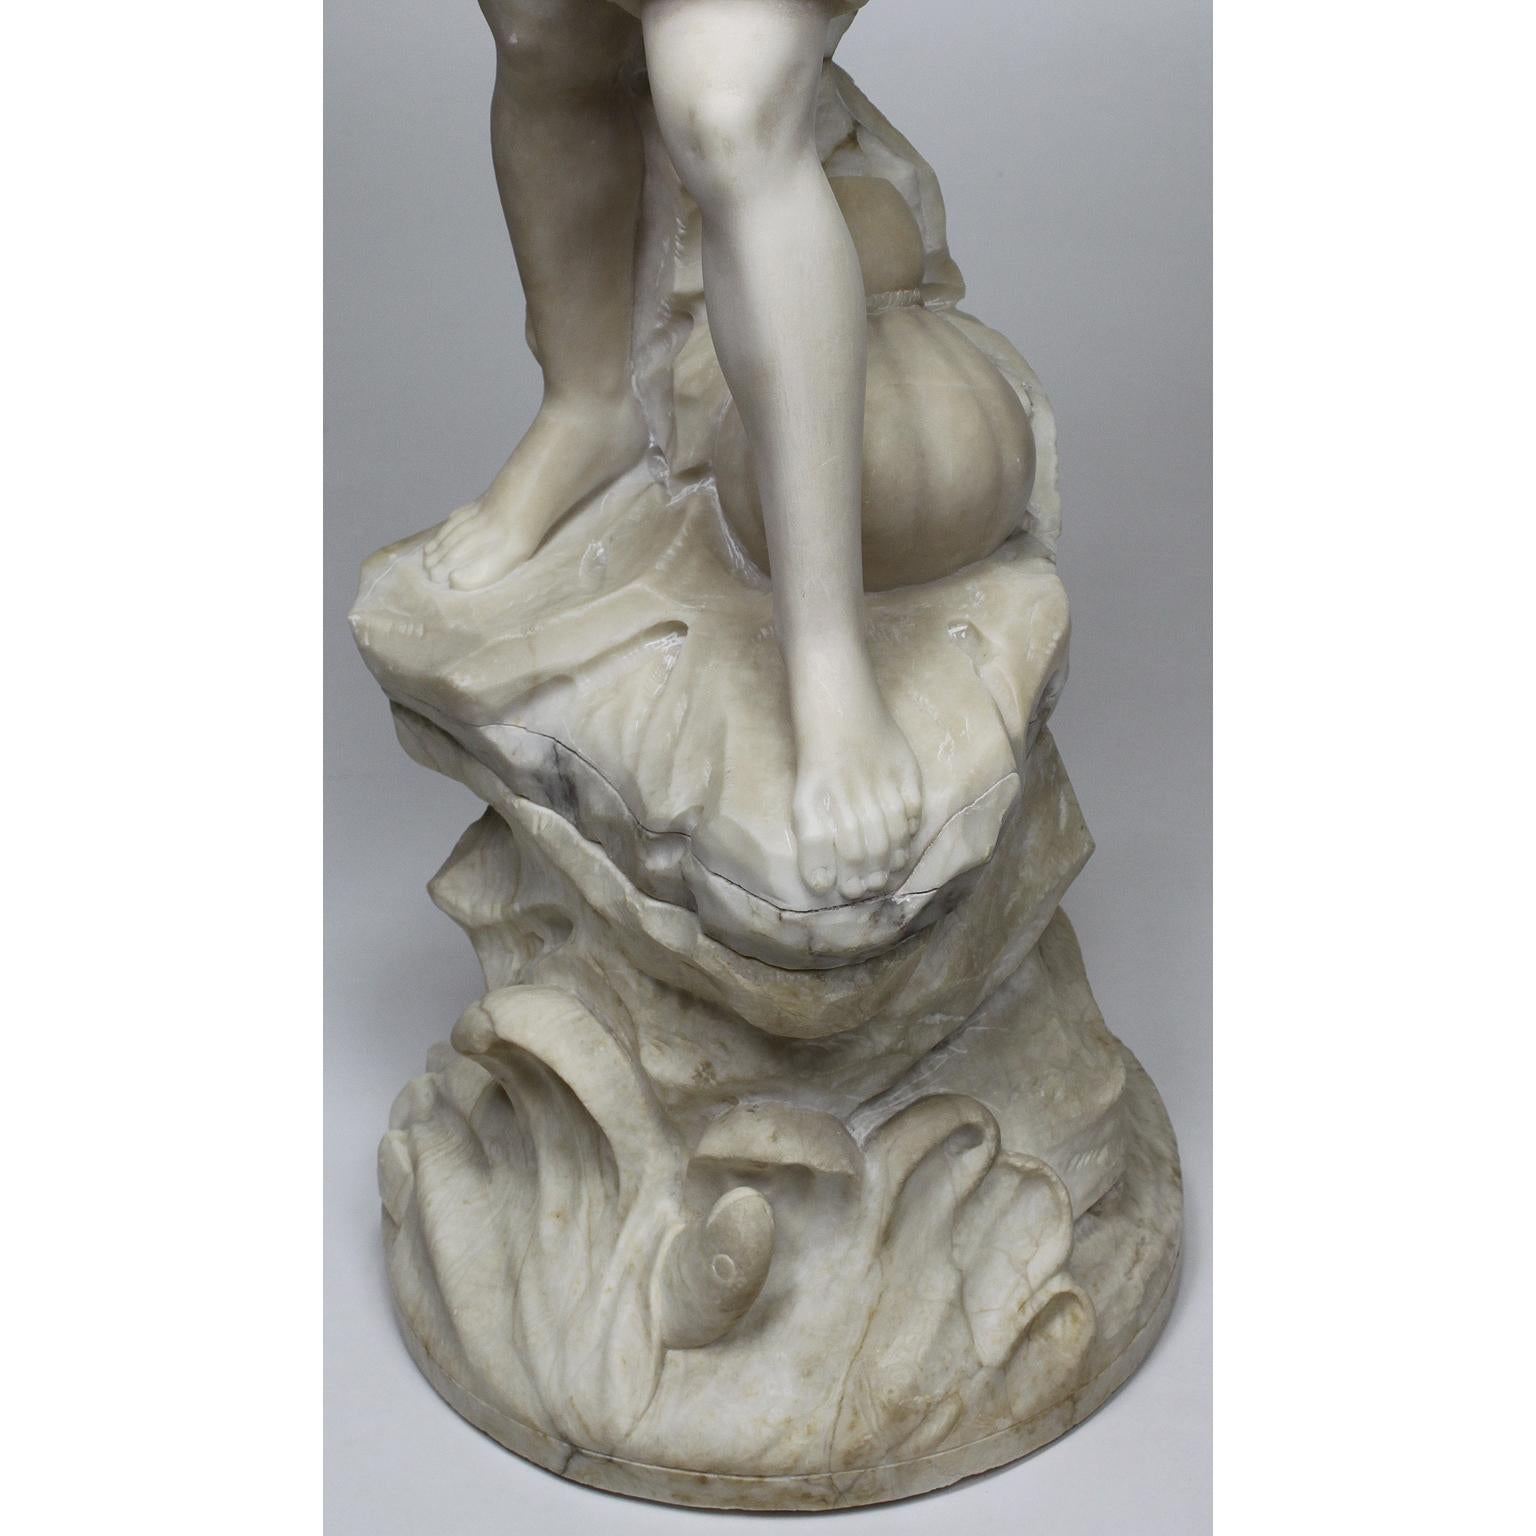 Charming Italian 19th-20th Century Carved Alabaster Figure of a Fisher Boy For Sale 4